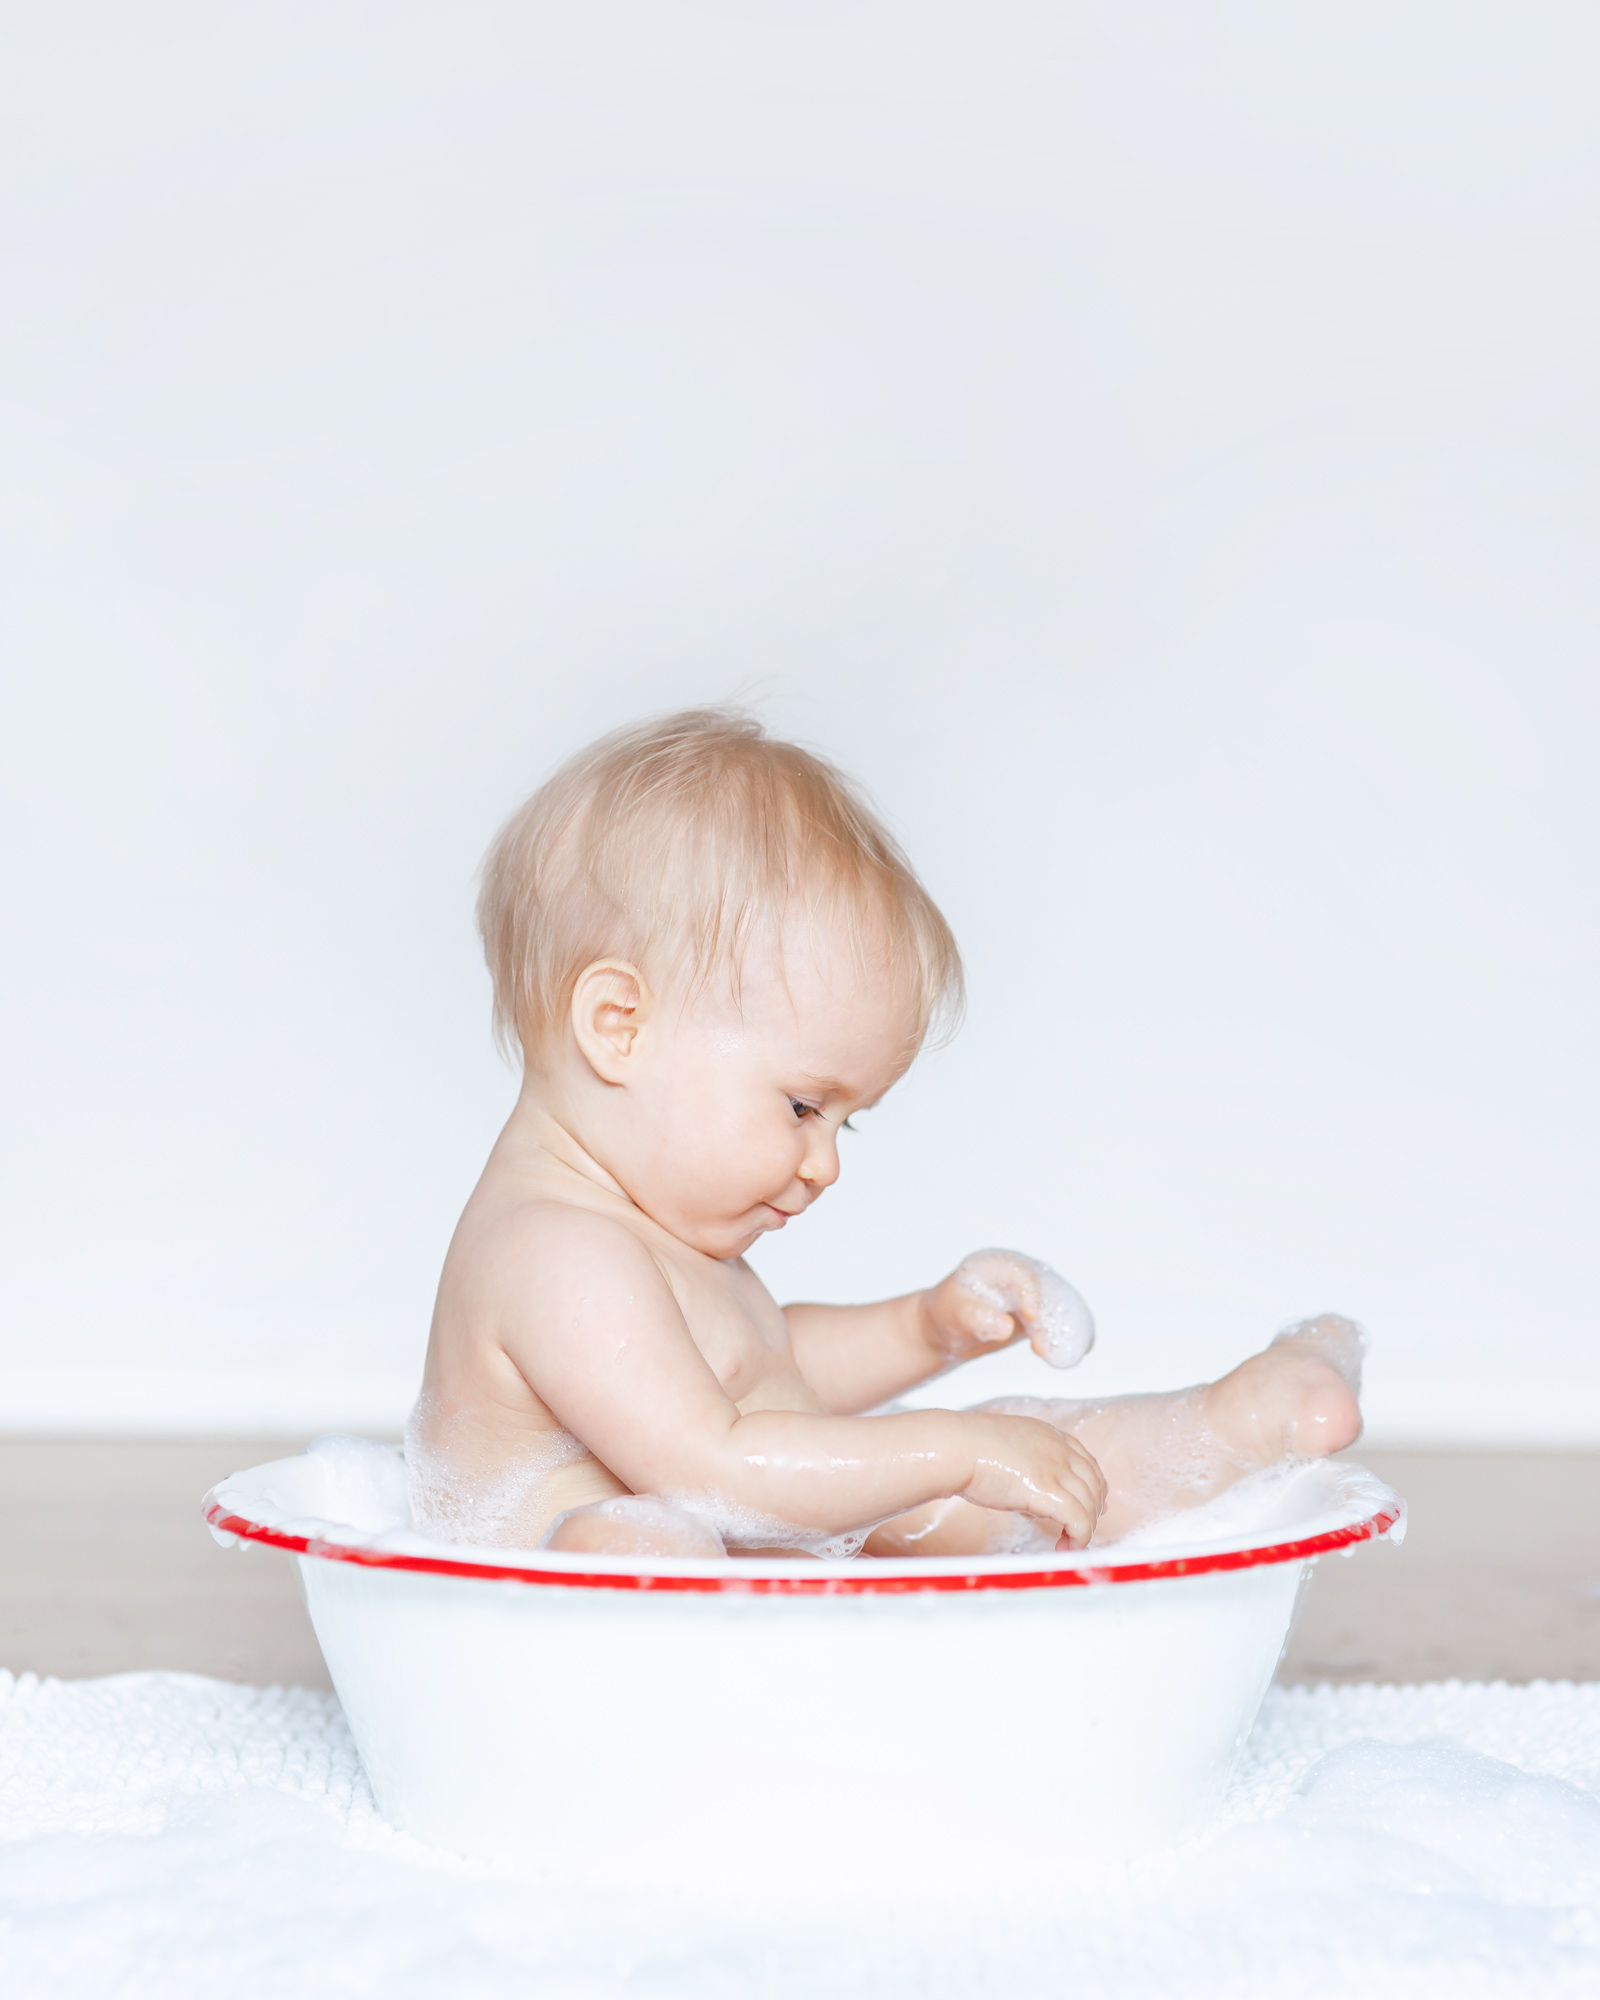 Infant playing with bubbles in a bath tub photo session